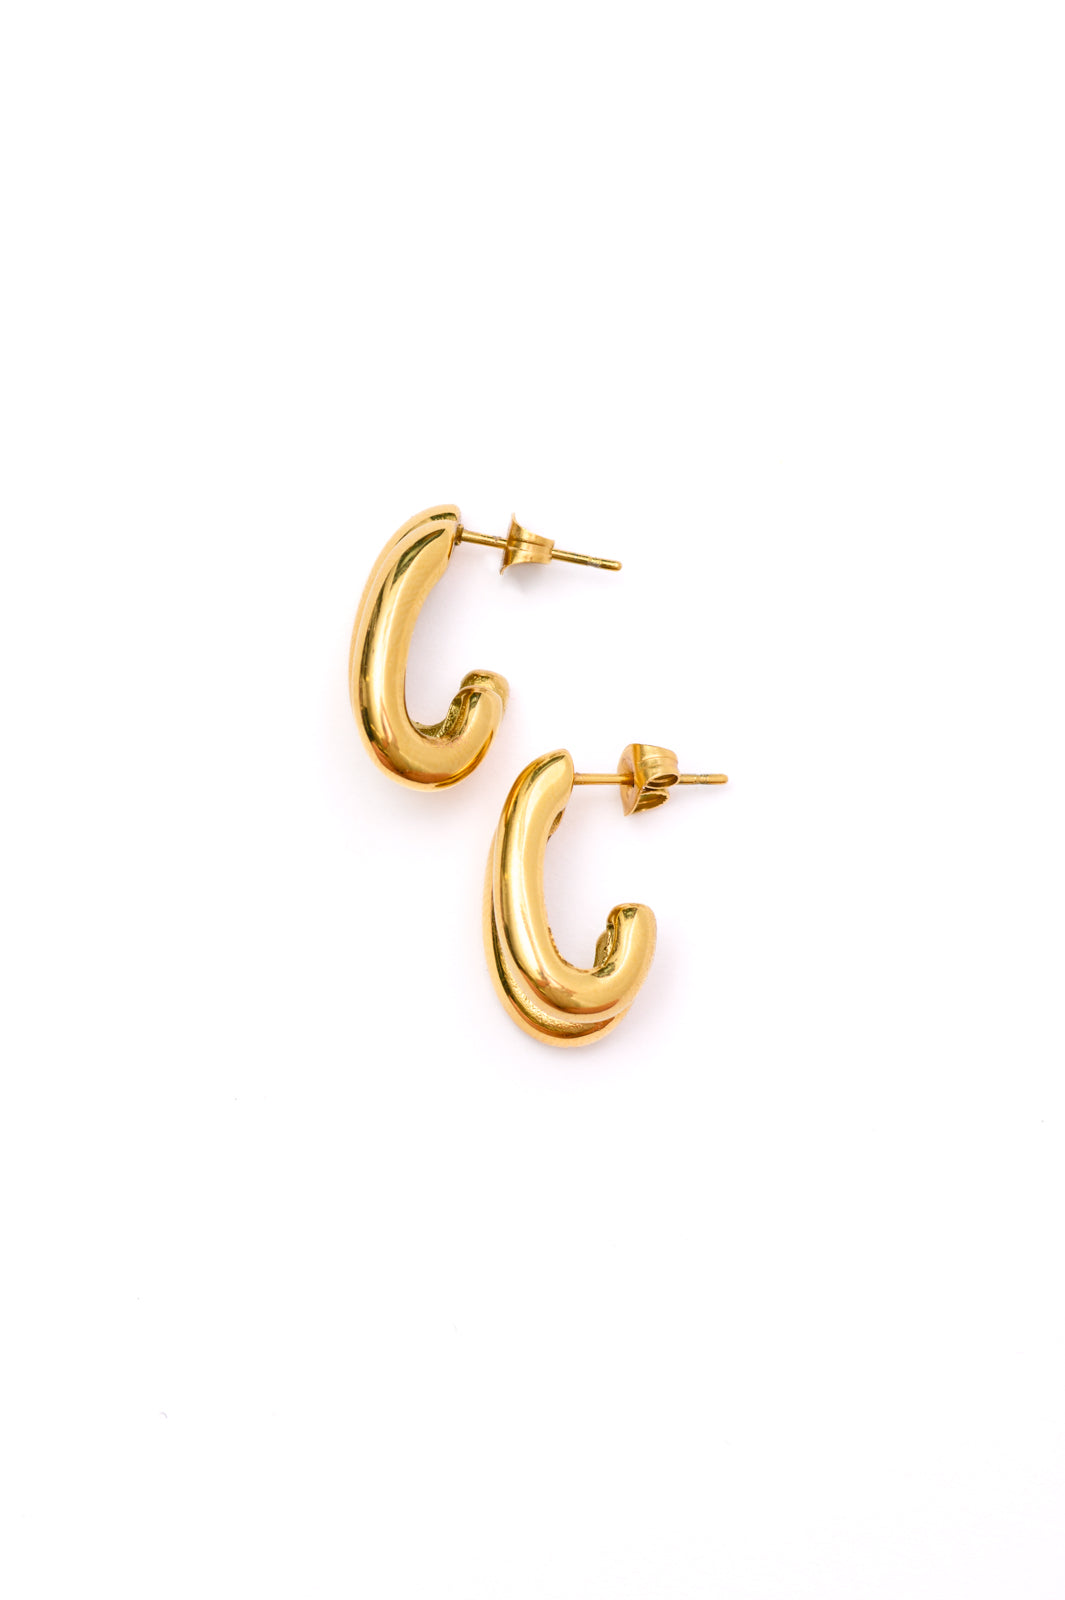 Pushing Limits Gold Plated Earrings - WEBSITE EXCLUSIVE